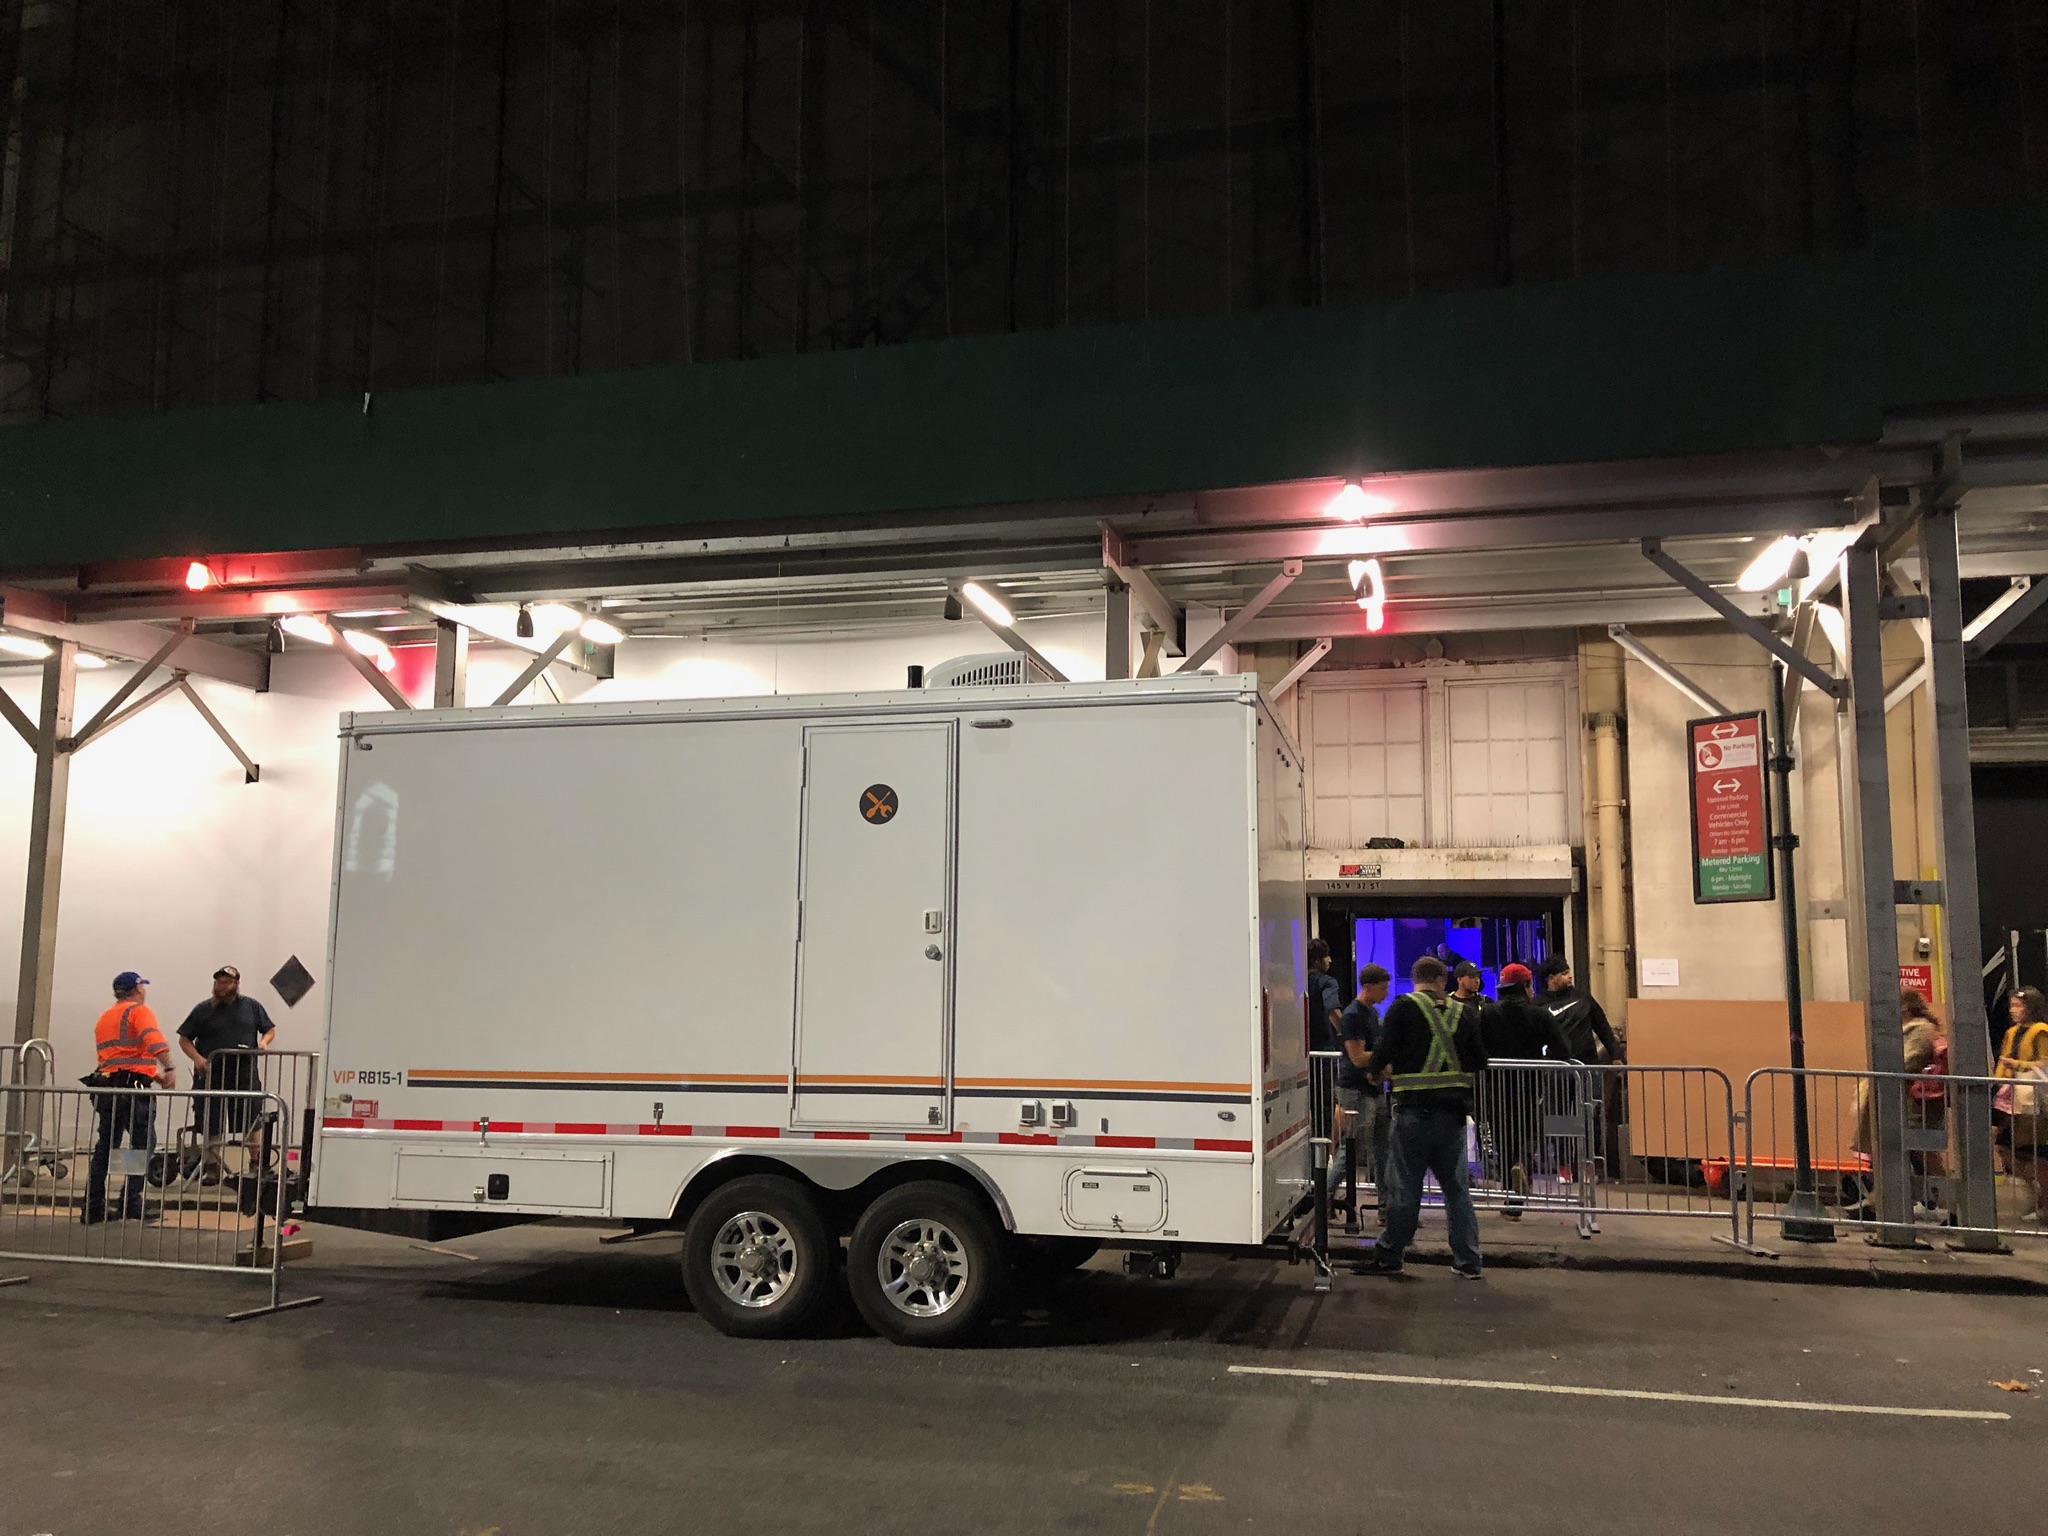 Five Station Rolls Royce Restroom Trailer, at Macy_s Day Parade by NBC Studios, in Manhattan NY 